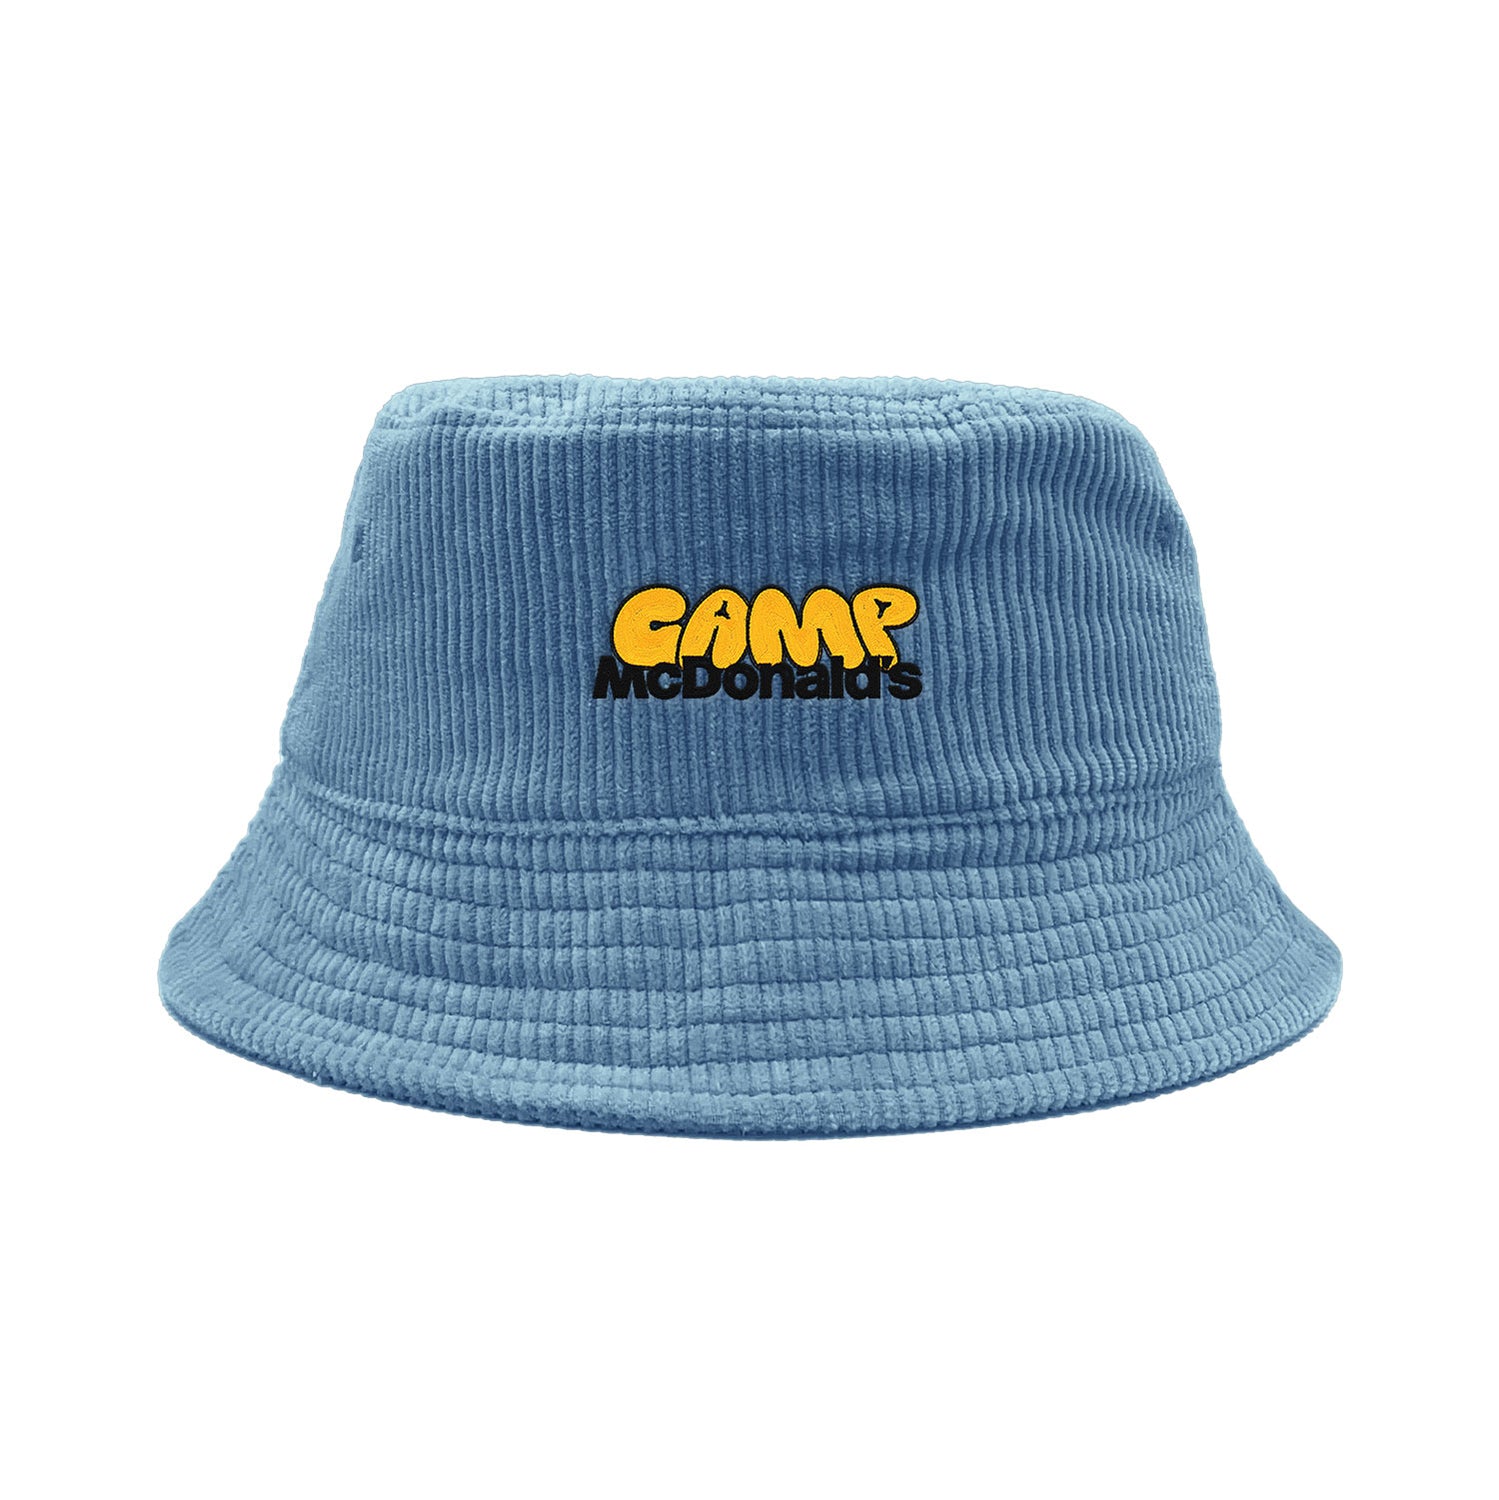 McDonalds Don't Trip Fat Corduroy Bucket Hat in blue with yellow and black Camp Mcdonalds embroidery on a white background - Free & Easy